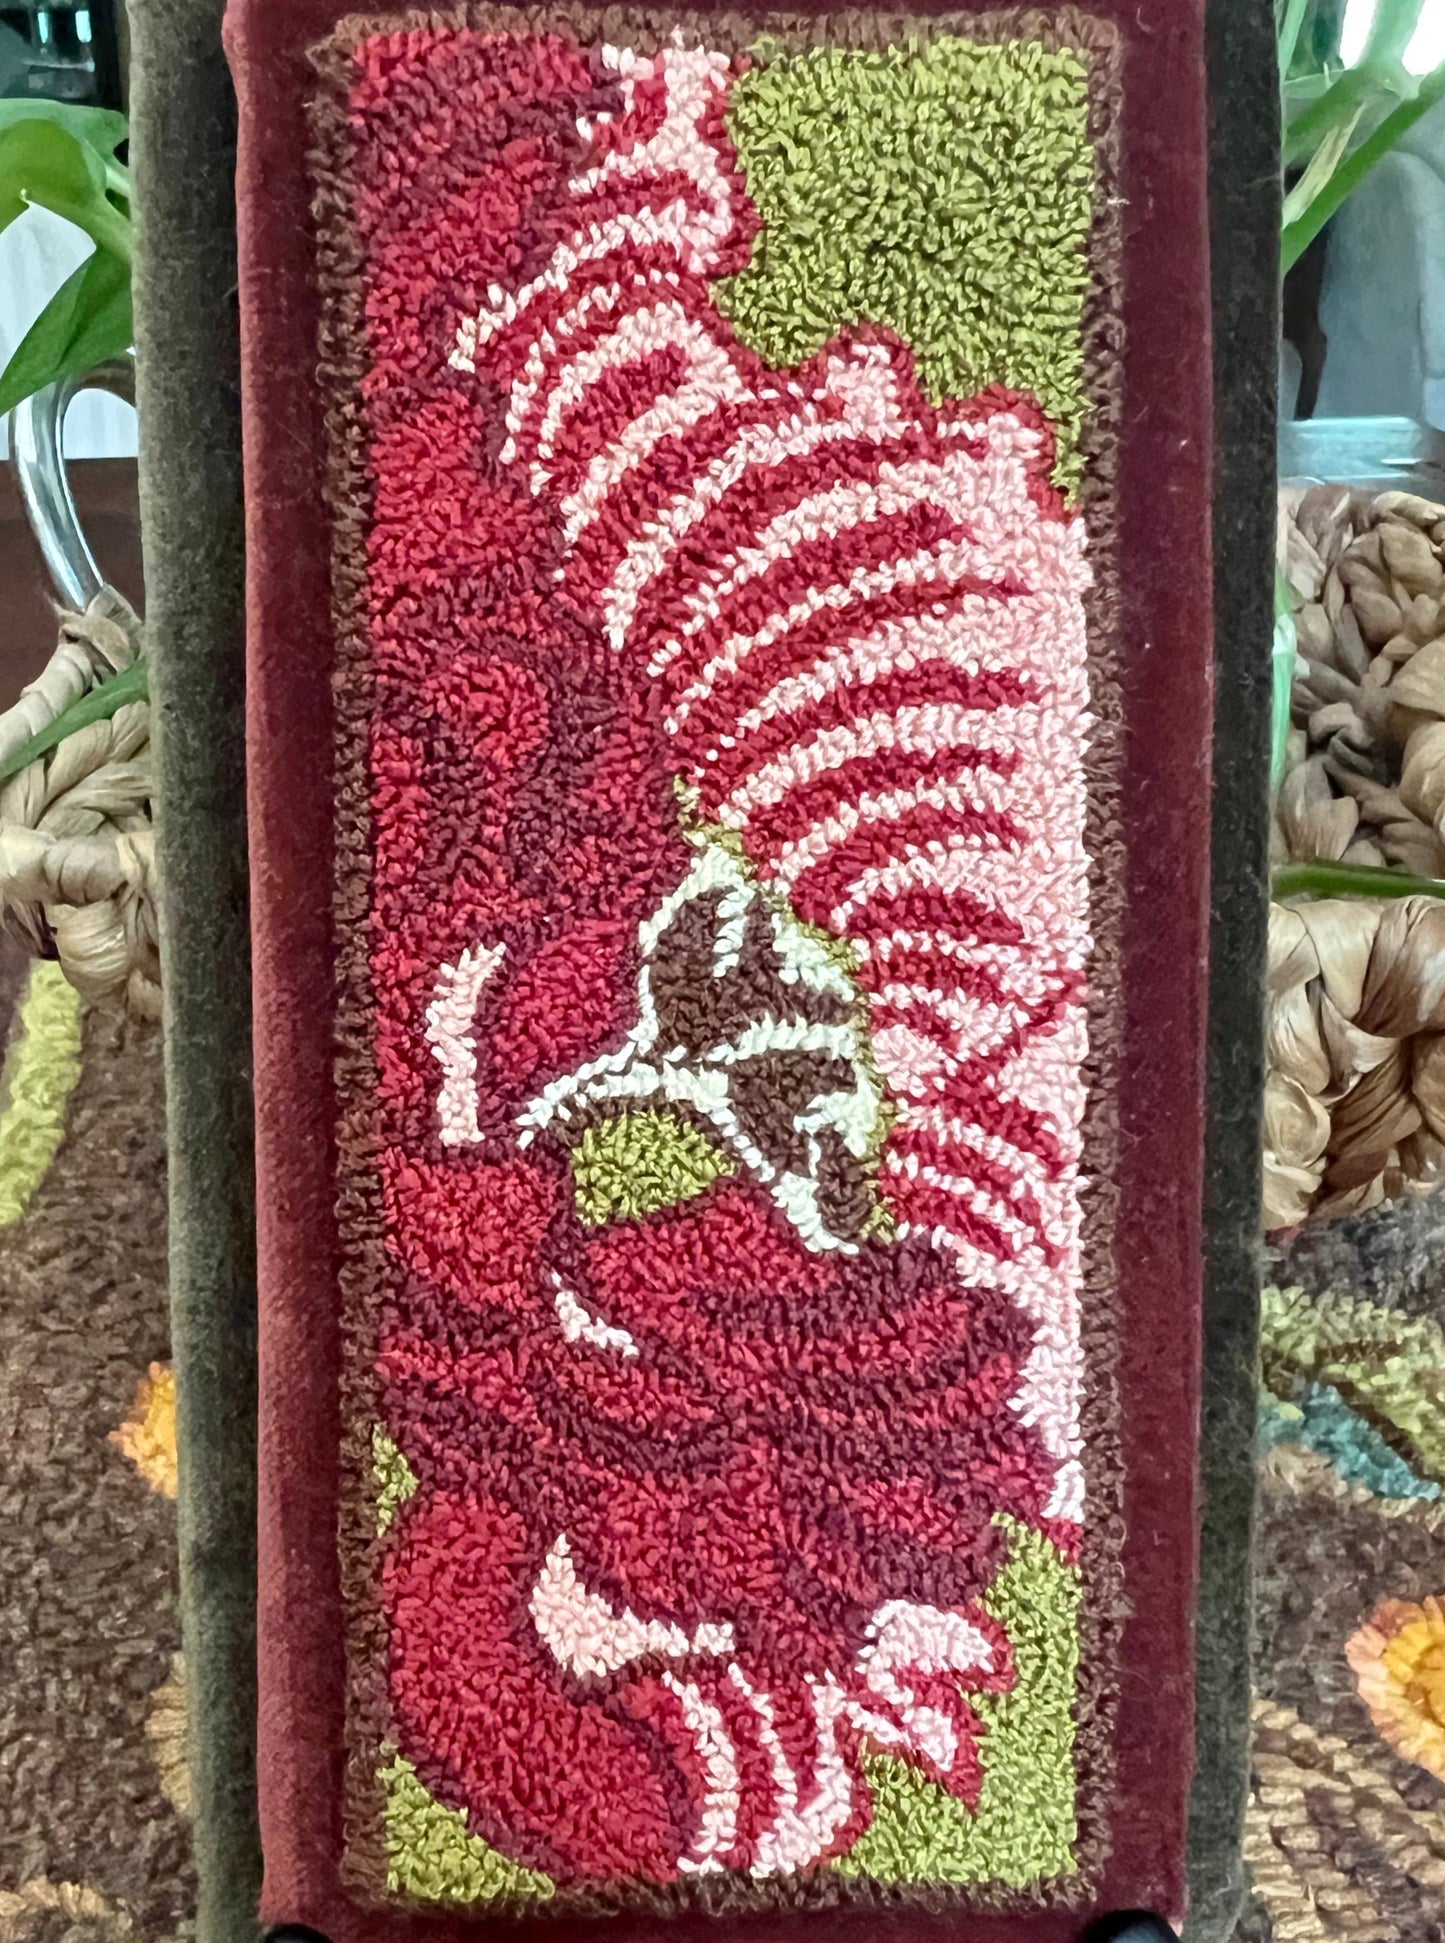  Crimson Punch Needle PDF Pattern by Orphaned Wool. This beautiful abstract floral design is perfect for the beginner or experienced punch needle artist. Copyright © 2023 Kelly Kanyok - All Rights Reserved.